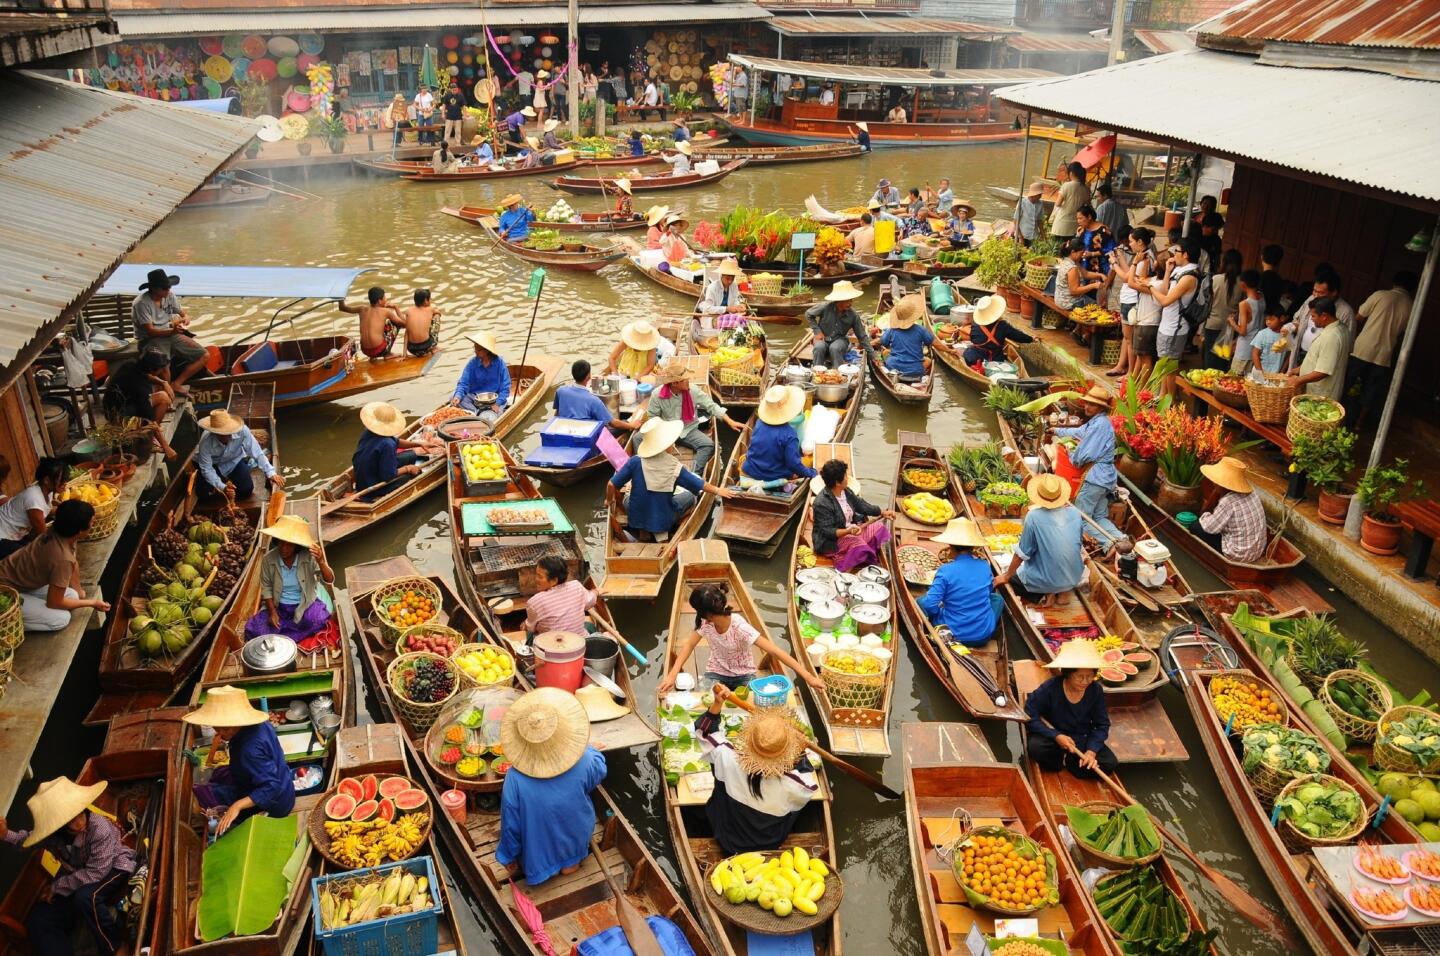 Wooden boats ferry people at the Amphawa Floating Market in Bangkok. This is a traditional and still popular method of buying and selling in the Amphawa canals. Bangkok's nickname is "Venice of the East." Head to Ayuthaya Historical Park (a UNESCO World Heritage site, 80 kilometers north of Bangkok) to see historic temples that are scattered throughout the former capital and along encircling rivers.